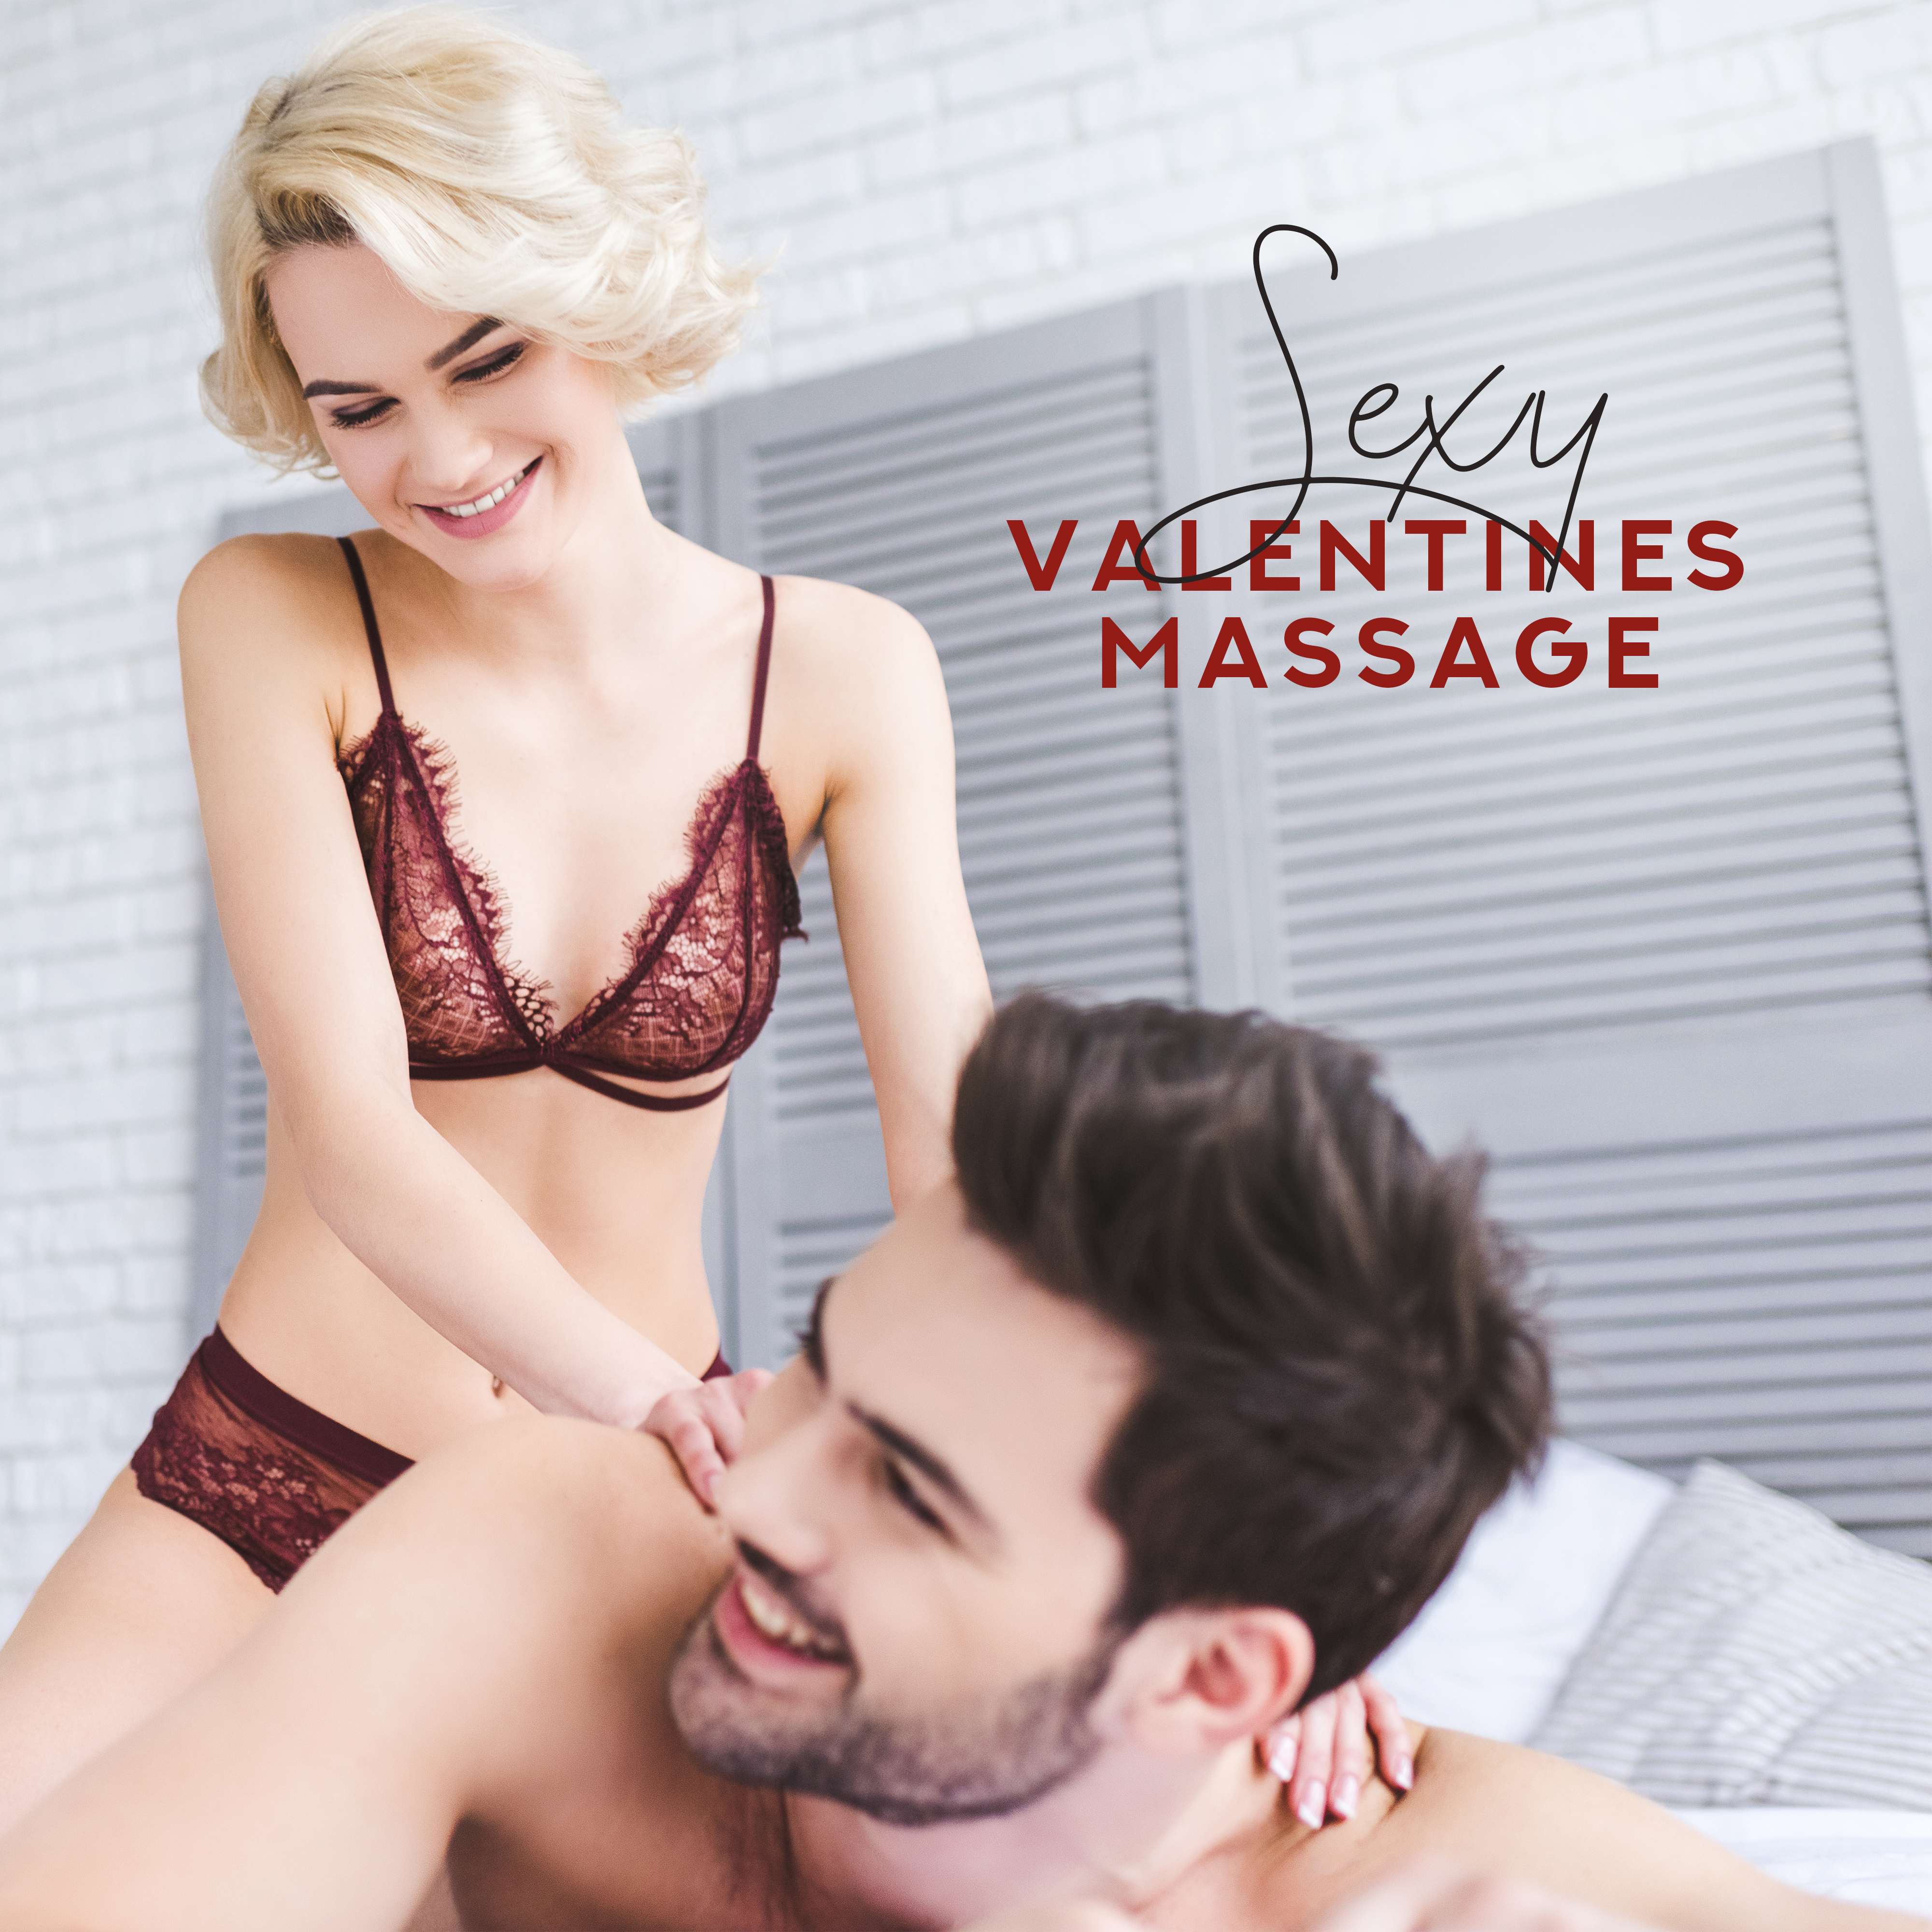 **** Valentines Massage – Erotic Meditation for Two, Sensual Yoga, Pure Relaxation, Sensual Massage Music, Tantric Music at Night